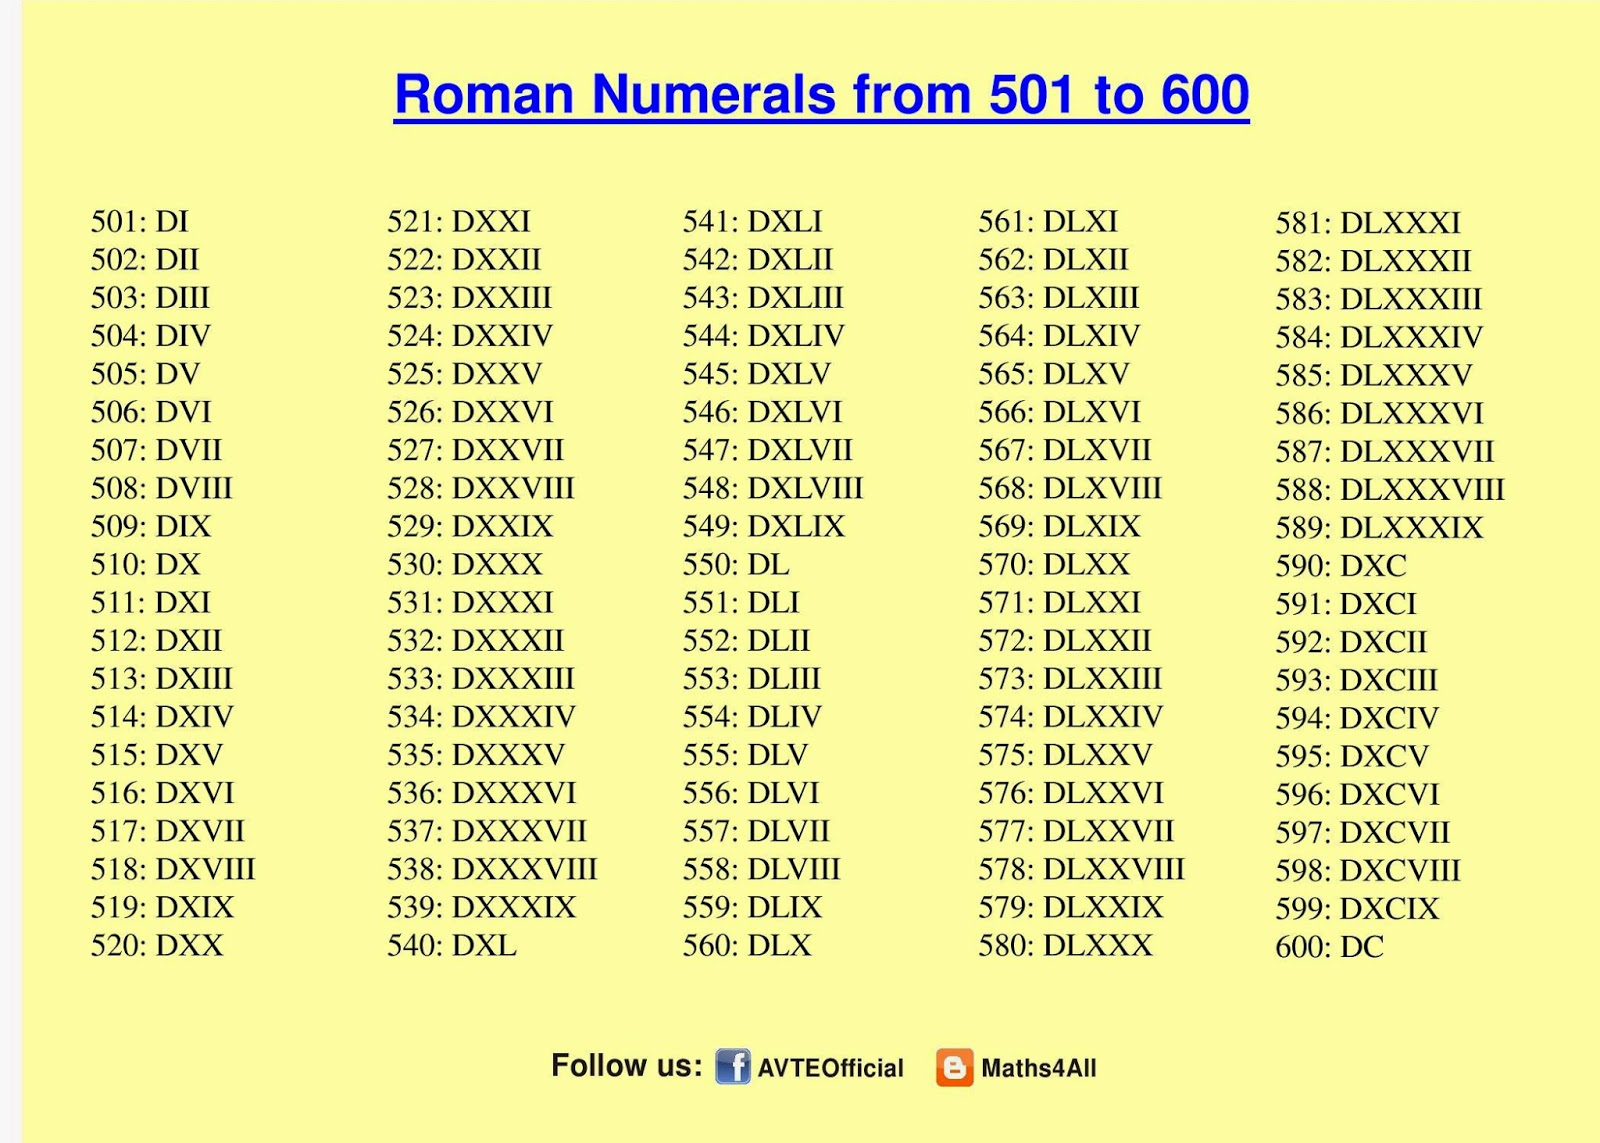 Maths4all ROMAN NUMERALS 501 TO 600